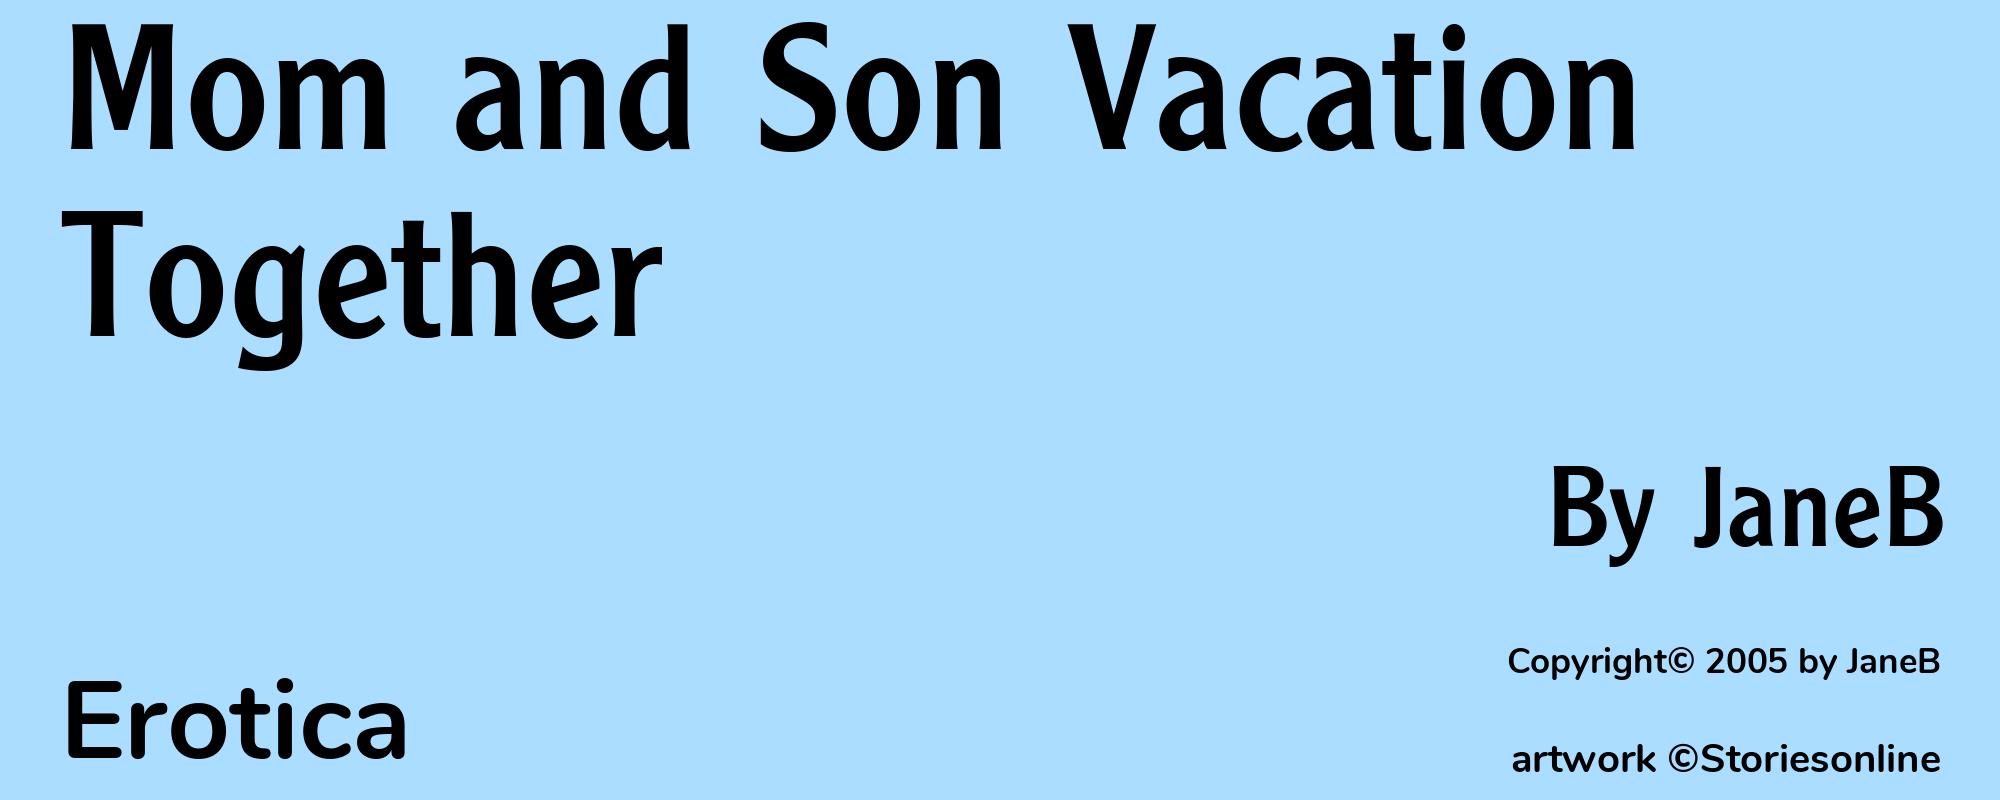 Mom and Son Vacation Together - Cover